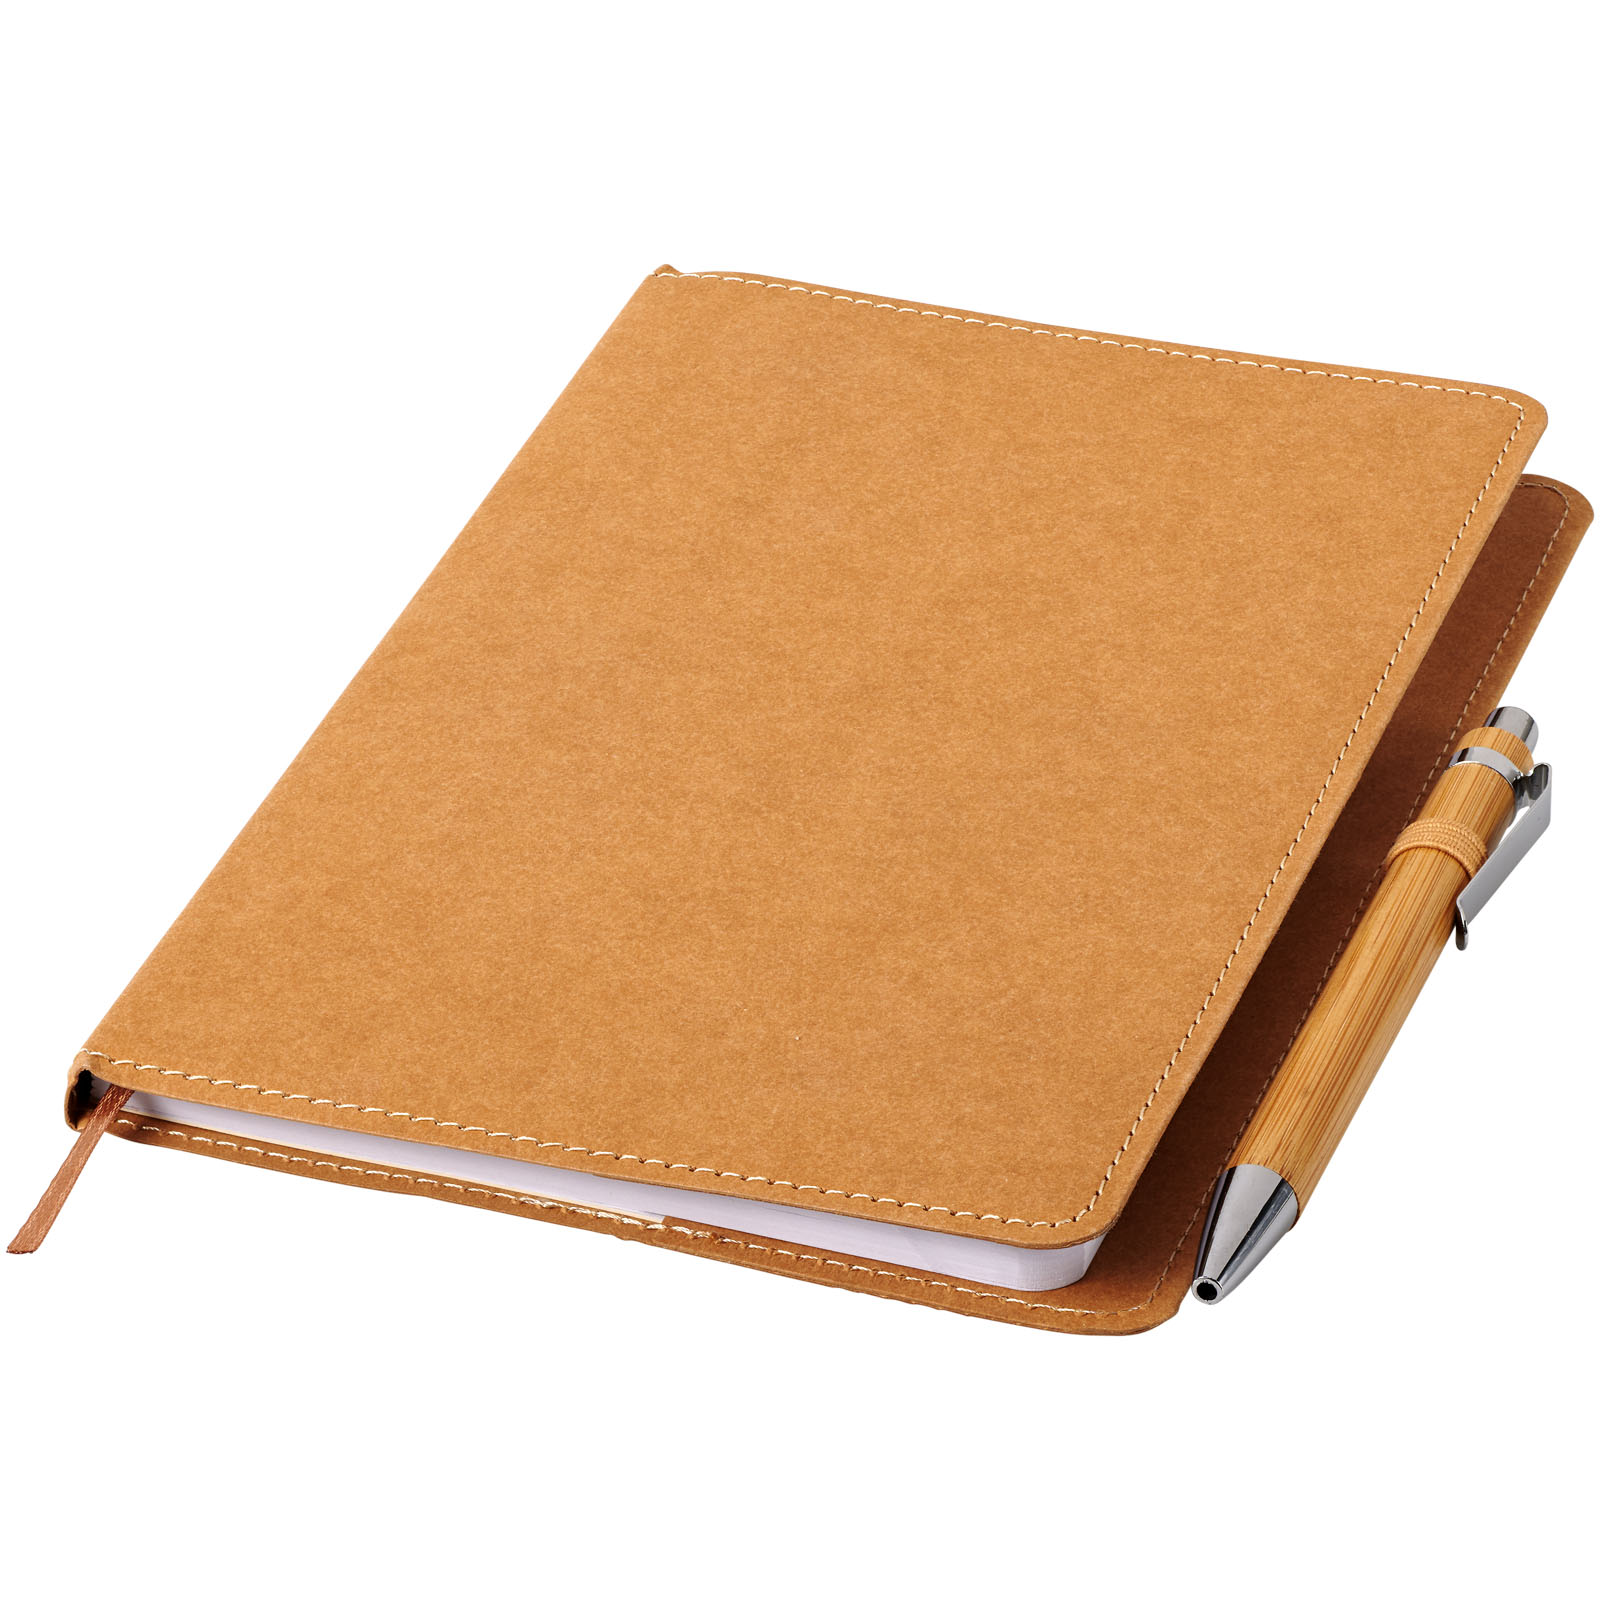 Notebook with Washable Kraft Material Cover and Bamboo Ballpoint Pen - Burscough Bridge